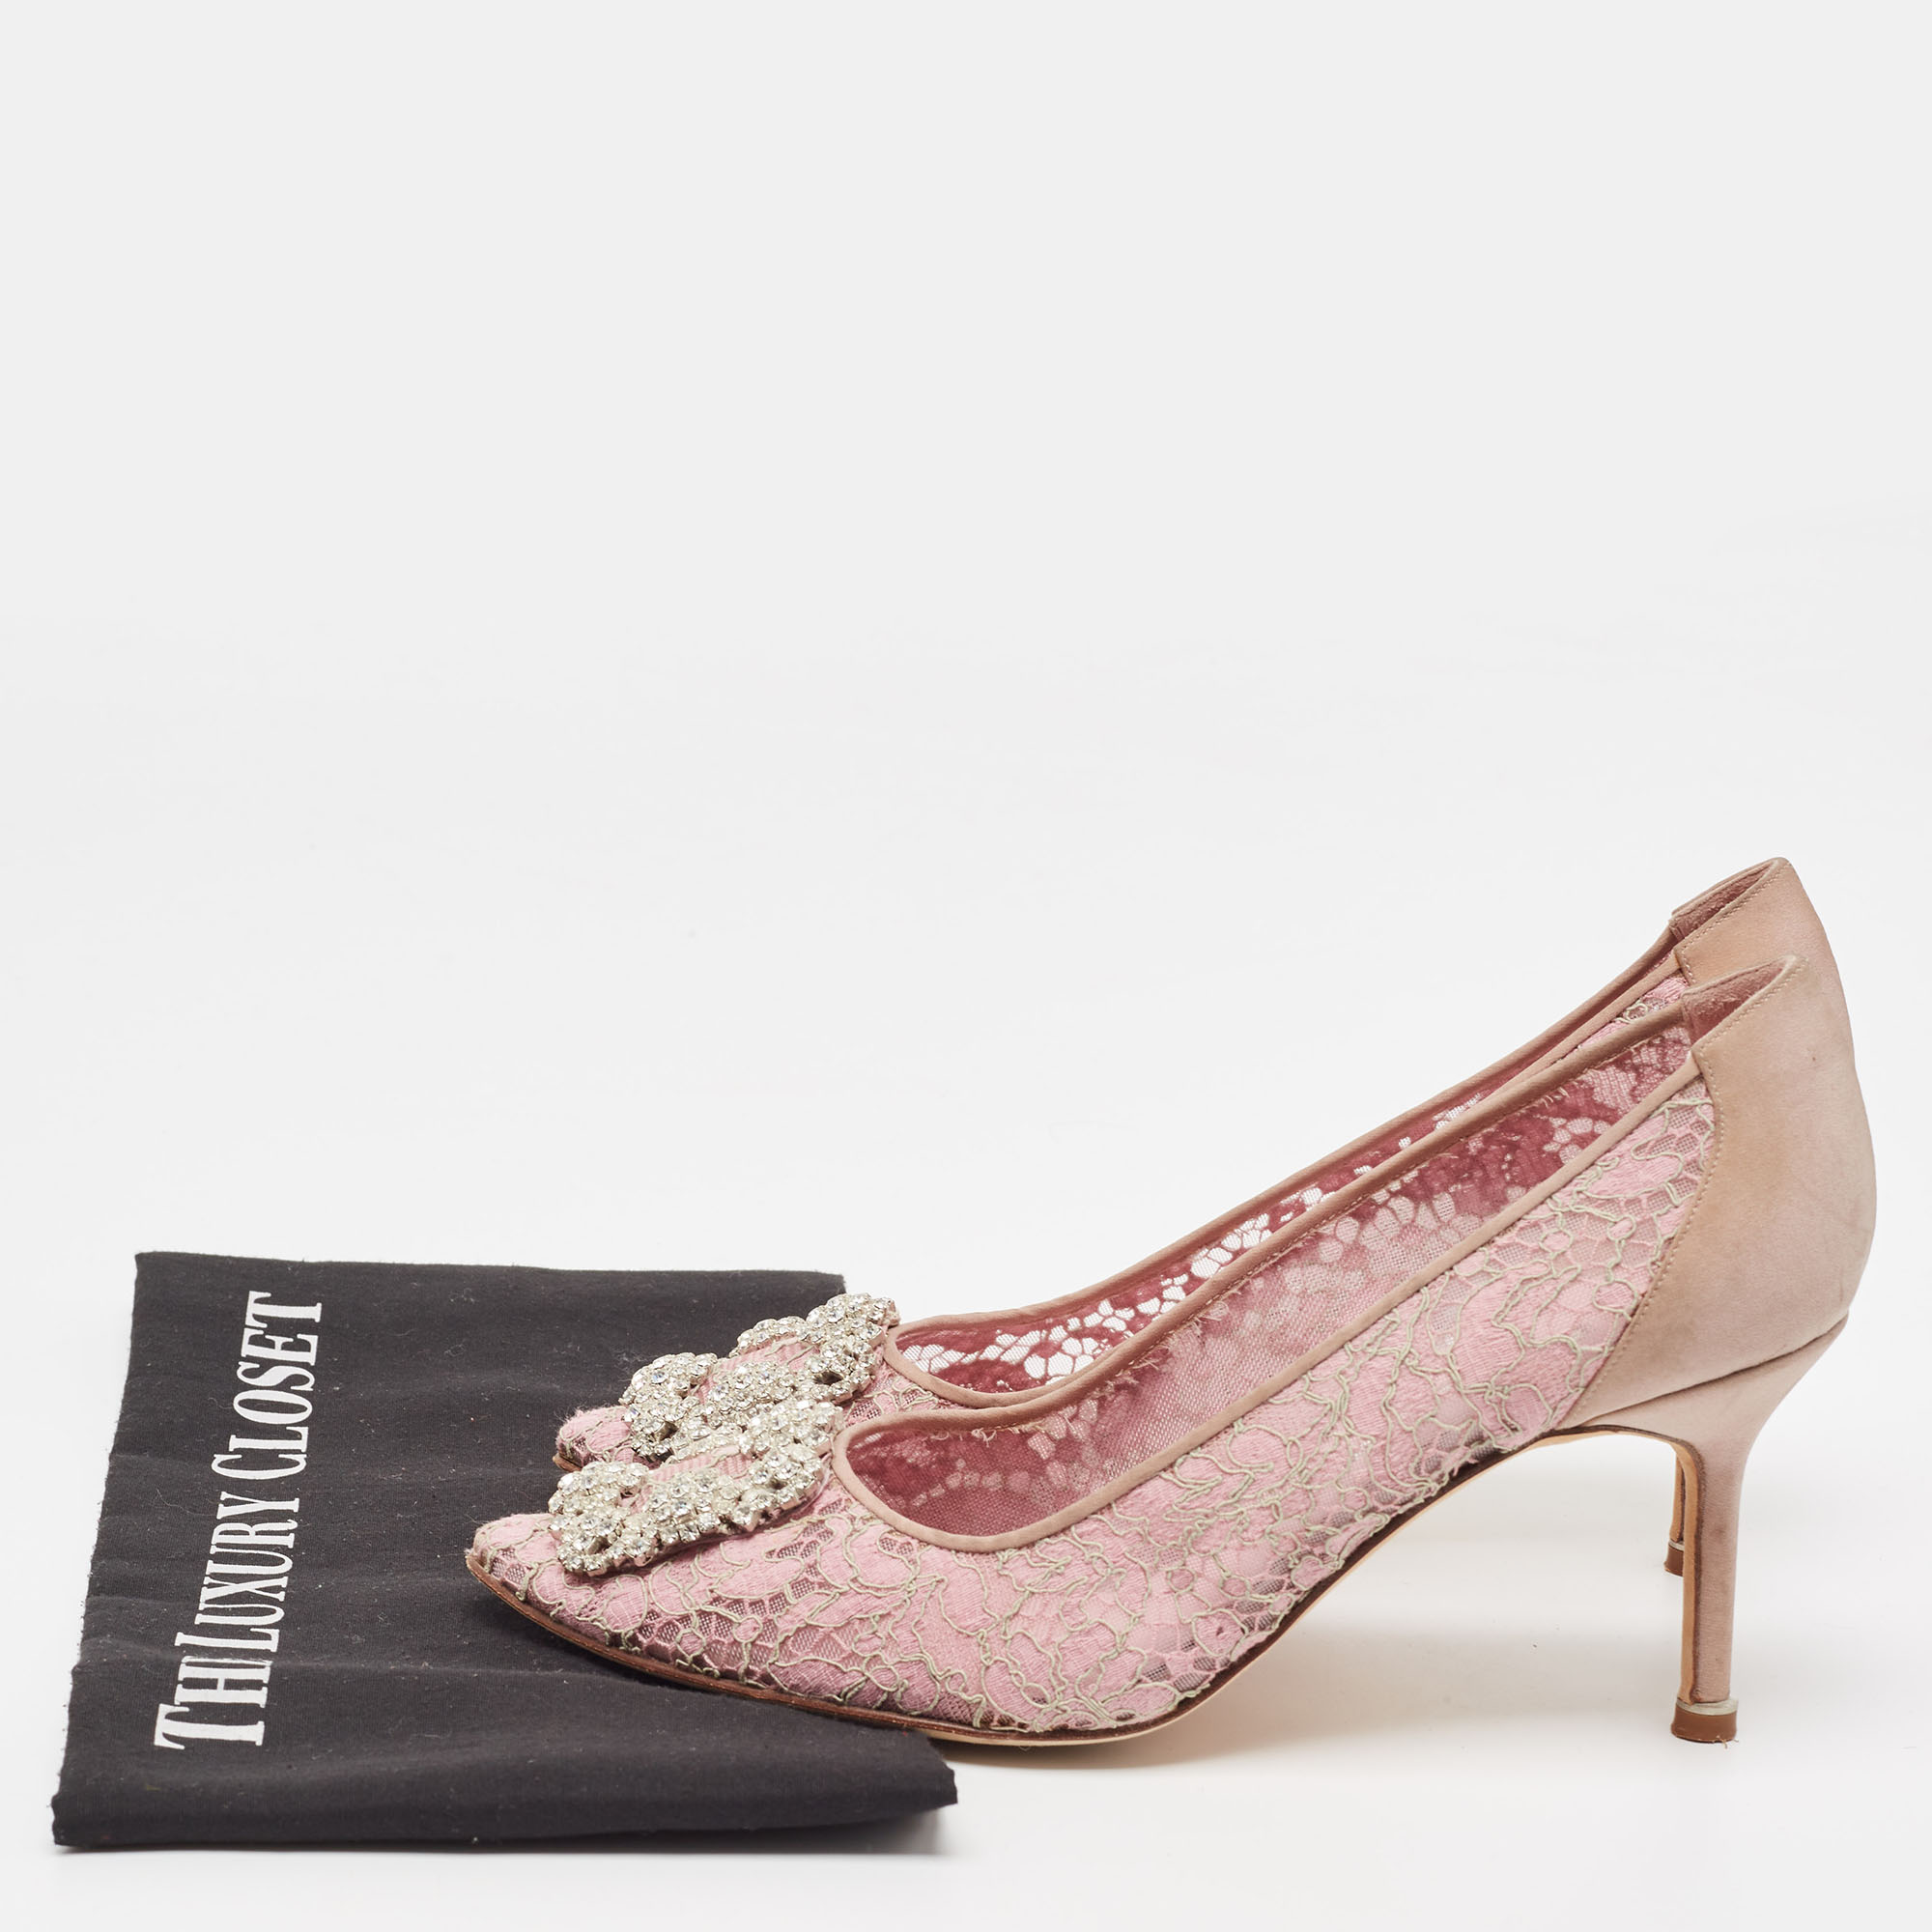 Manolo Blahnik Pink Lace And Mesh Hangisi Pumps Size 38.5